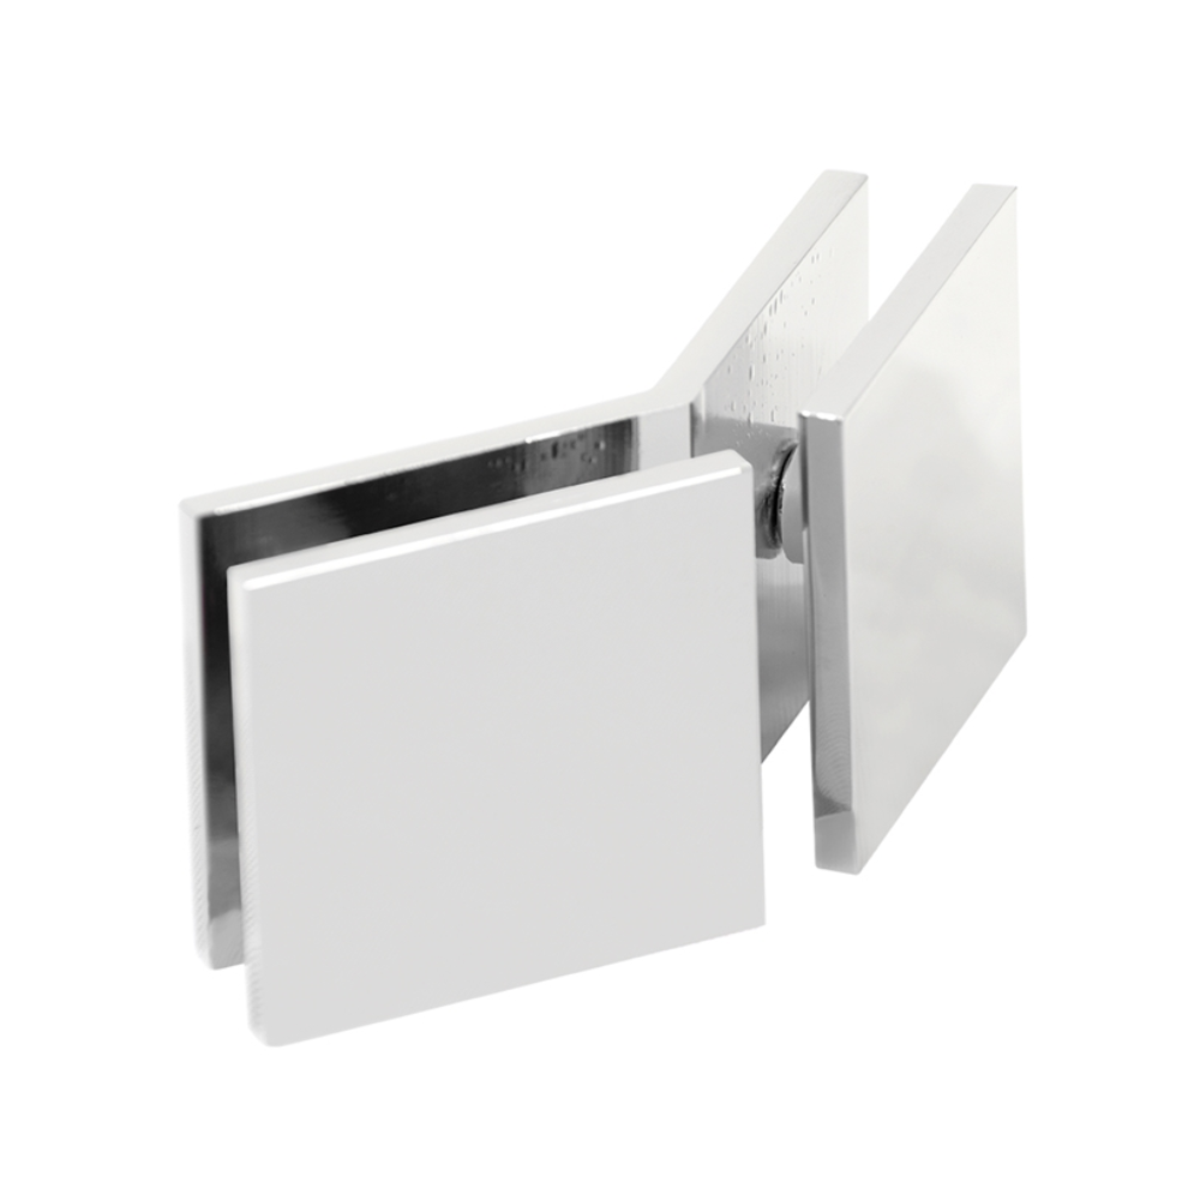 1 3/4" x 1 3/4" 135° Glass to Glass Square Edges Glass Clamp